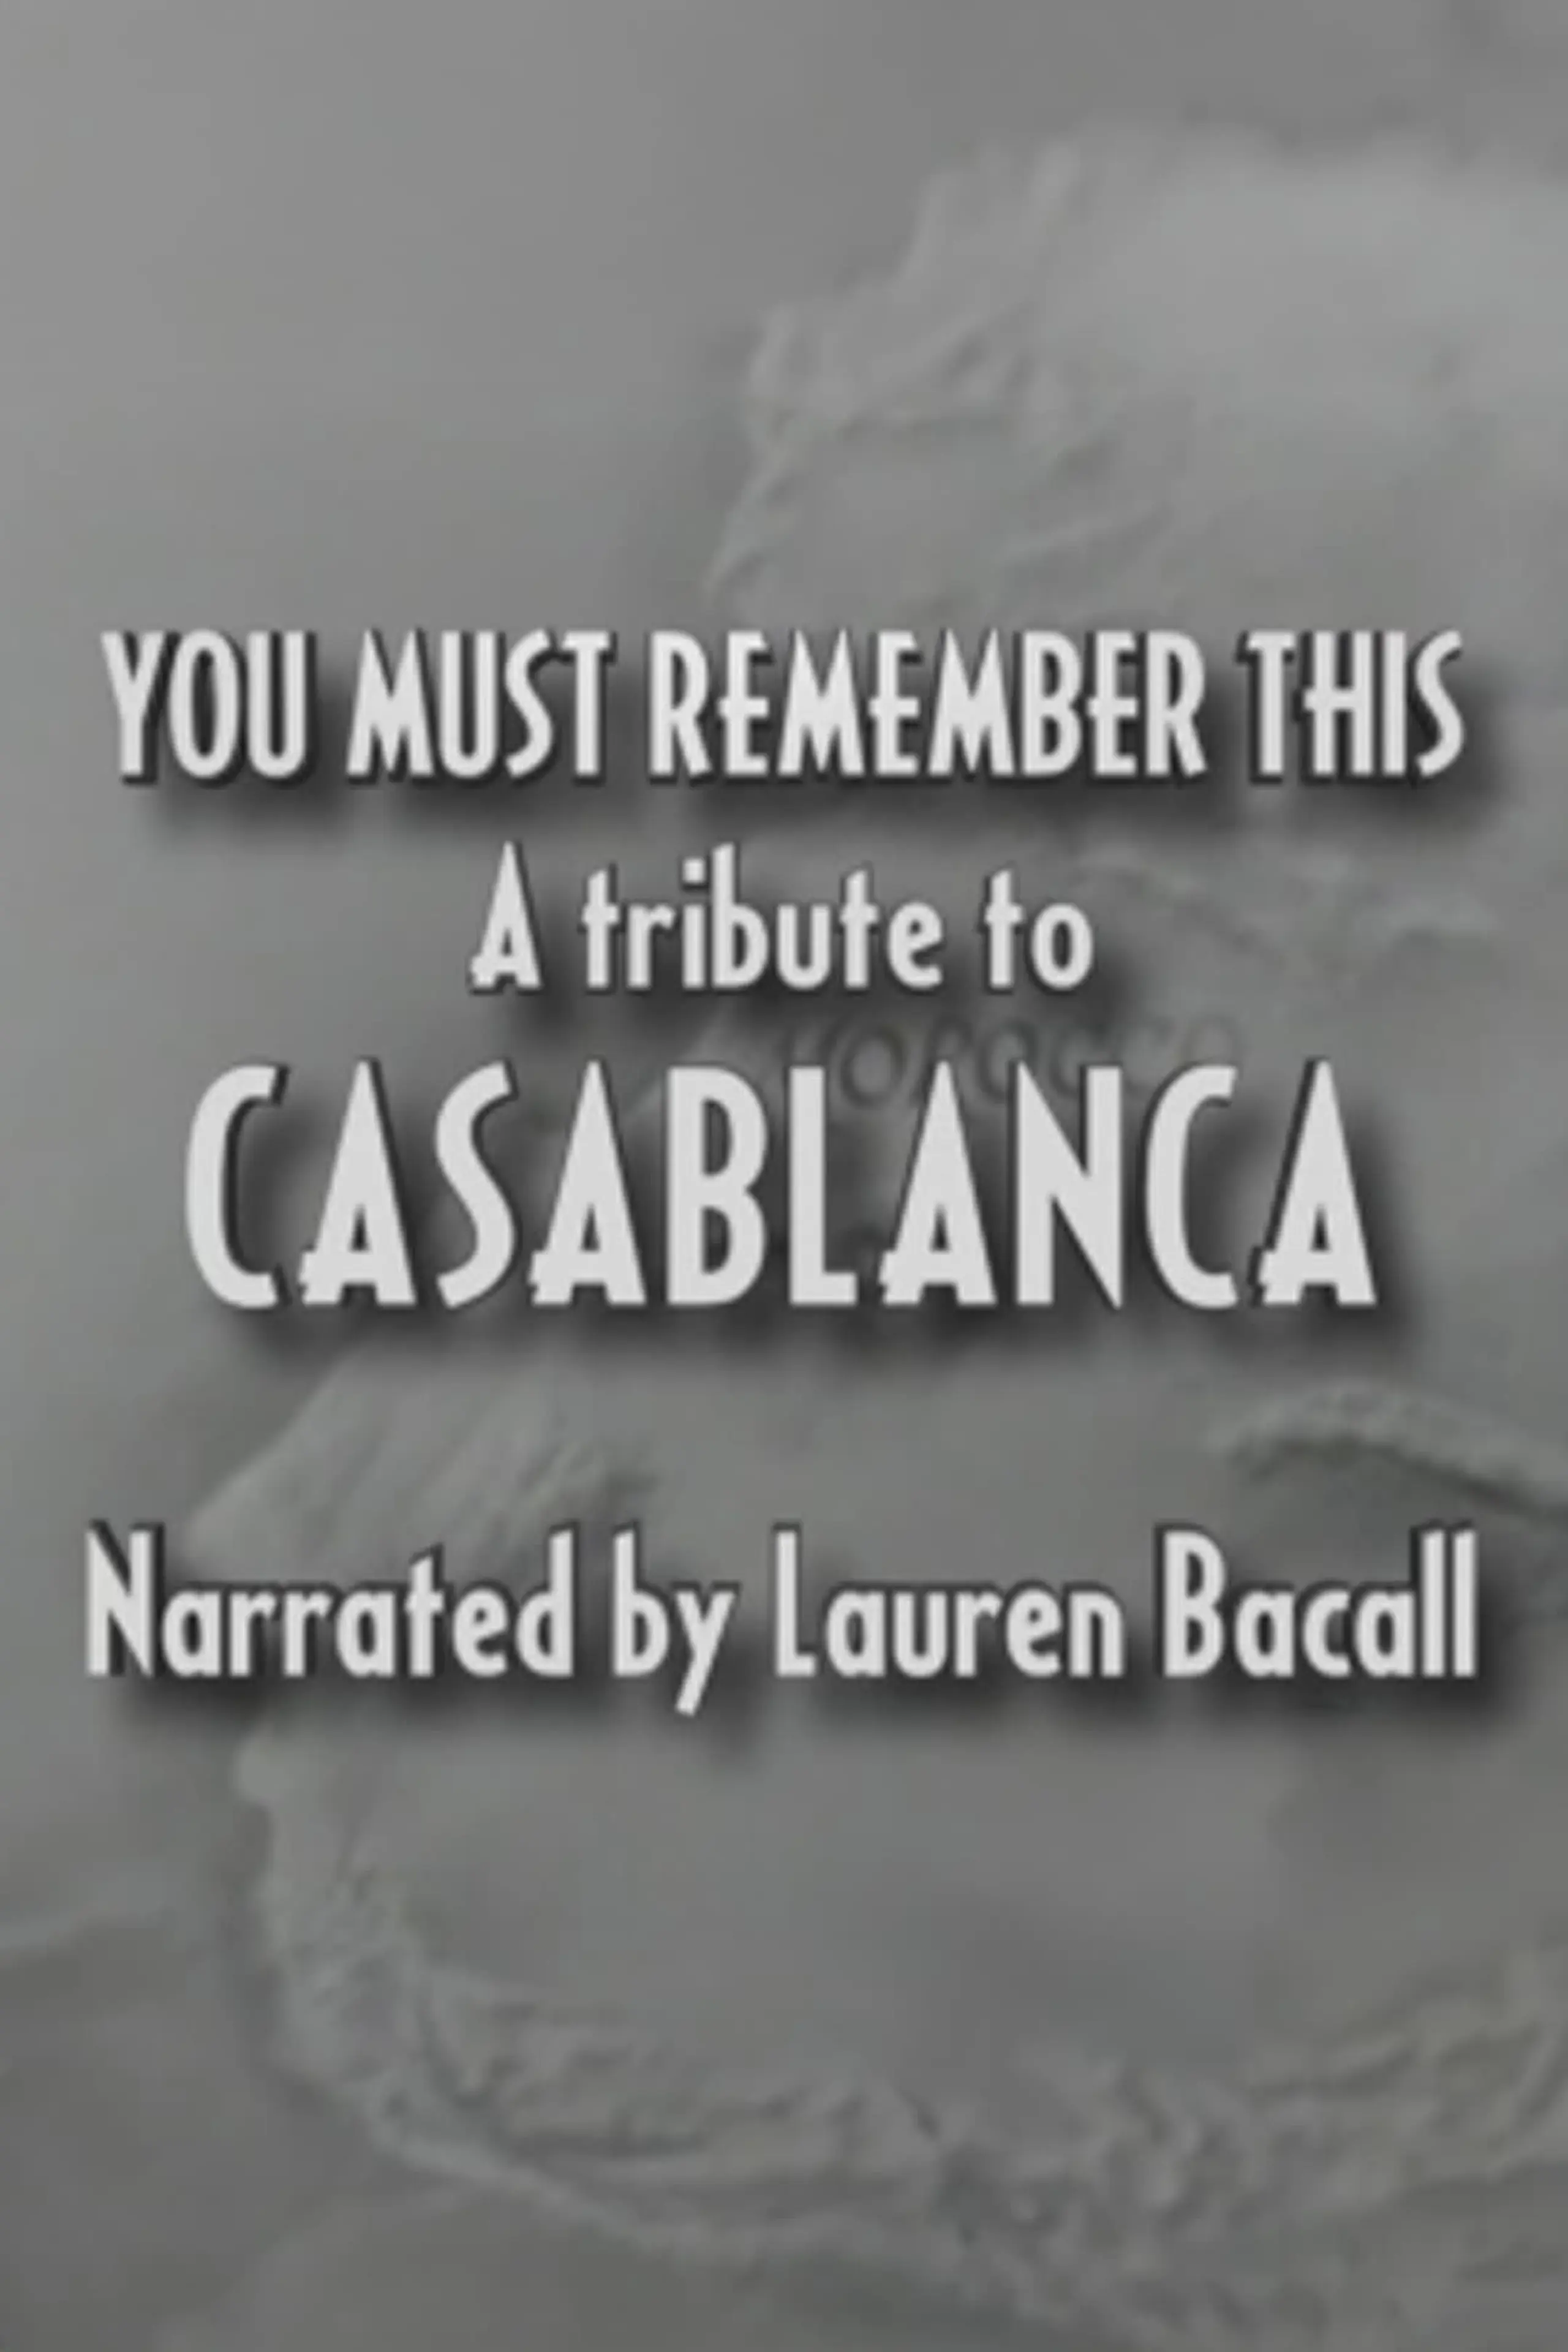 You Must Remember This: Ein Tribut an Casablanca